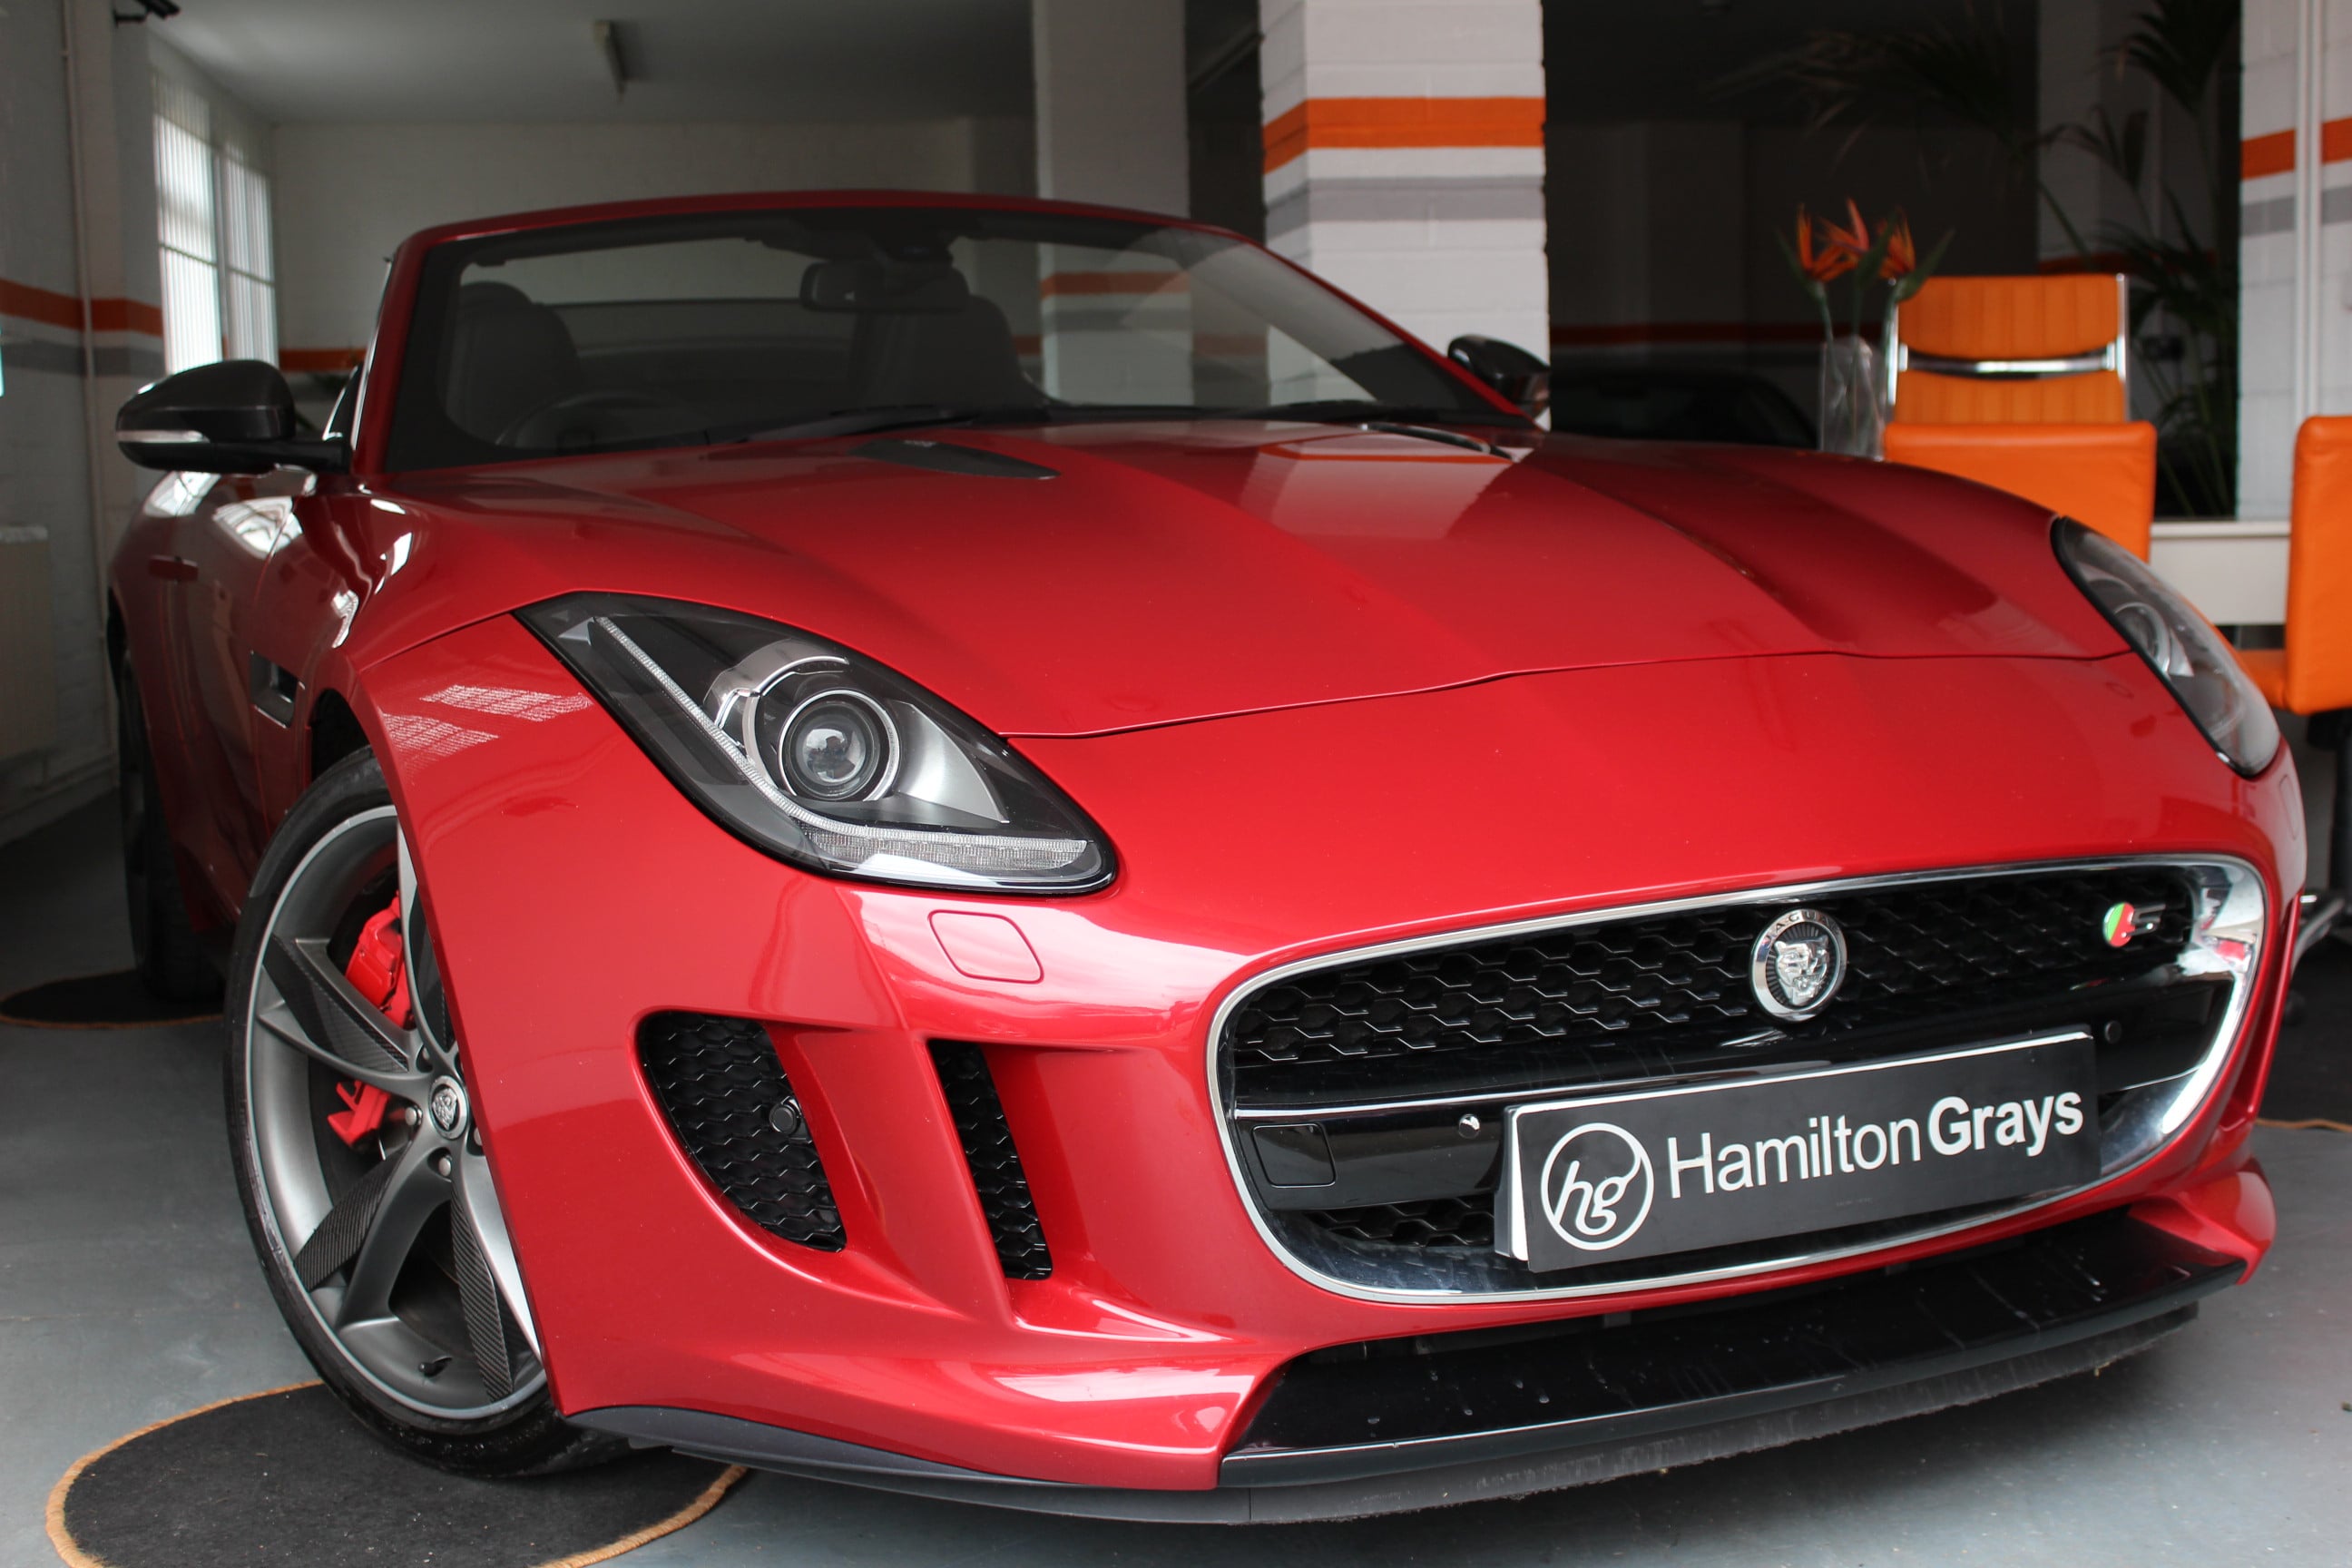 2013 (13) JAGUAR F TYPE S 5.0 SUPERCHARGED, IN ITALIAN RACING RED WITH BLACK LEATHER INTERIOR.     1 FORMER KEEPER! (SOLD)